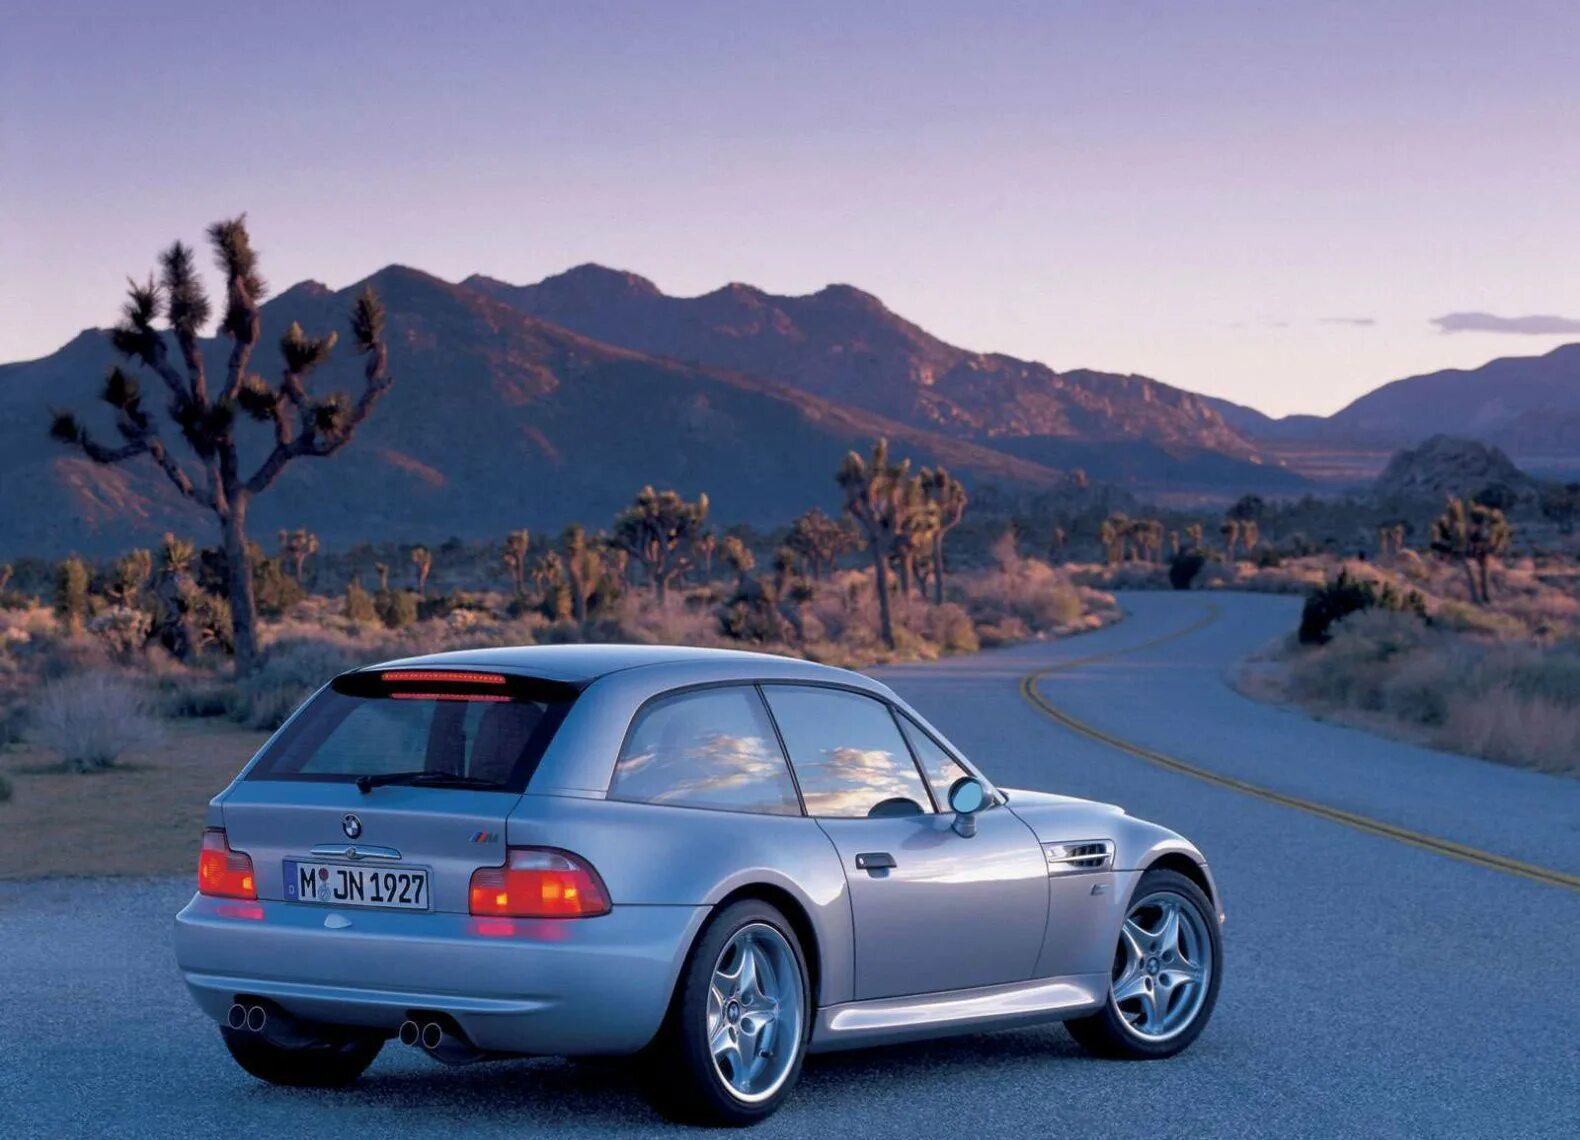 Bmw m coupe. BMW z3 m Coupe. 2002 BMW z3 m Coupe. BMW z3m Coupe 1999. BMW z3 Coupe 2002.